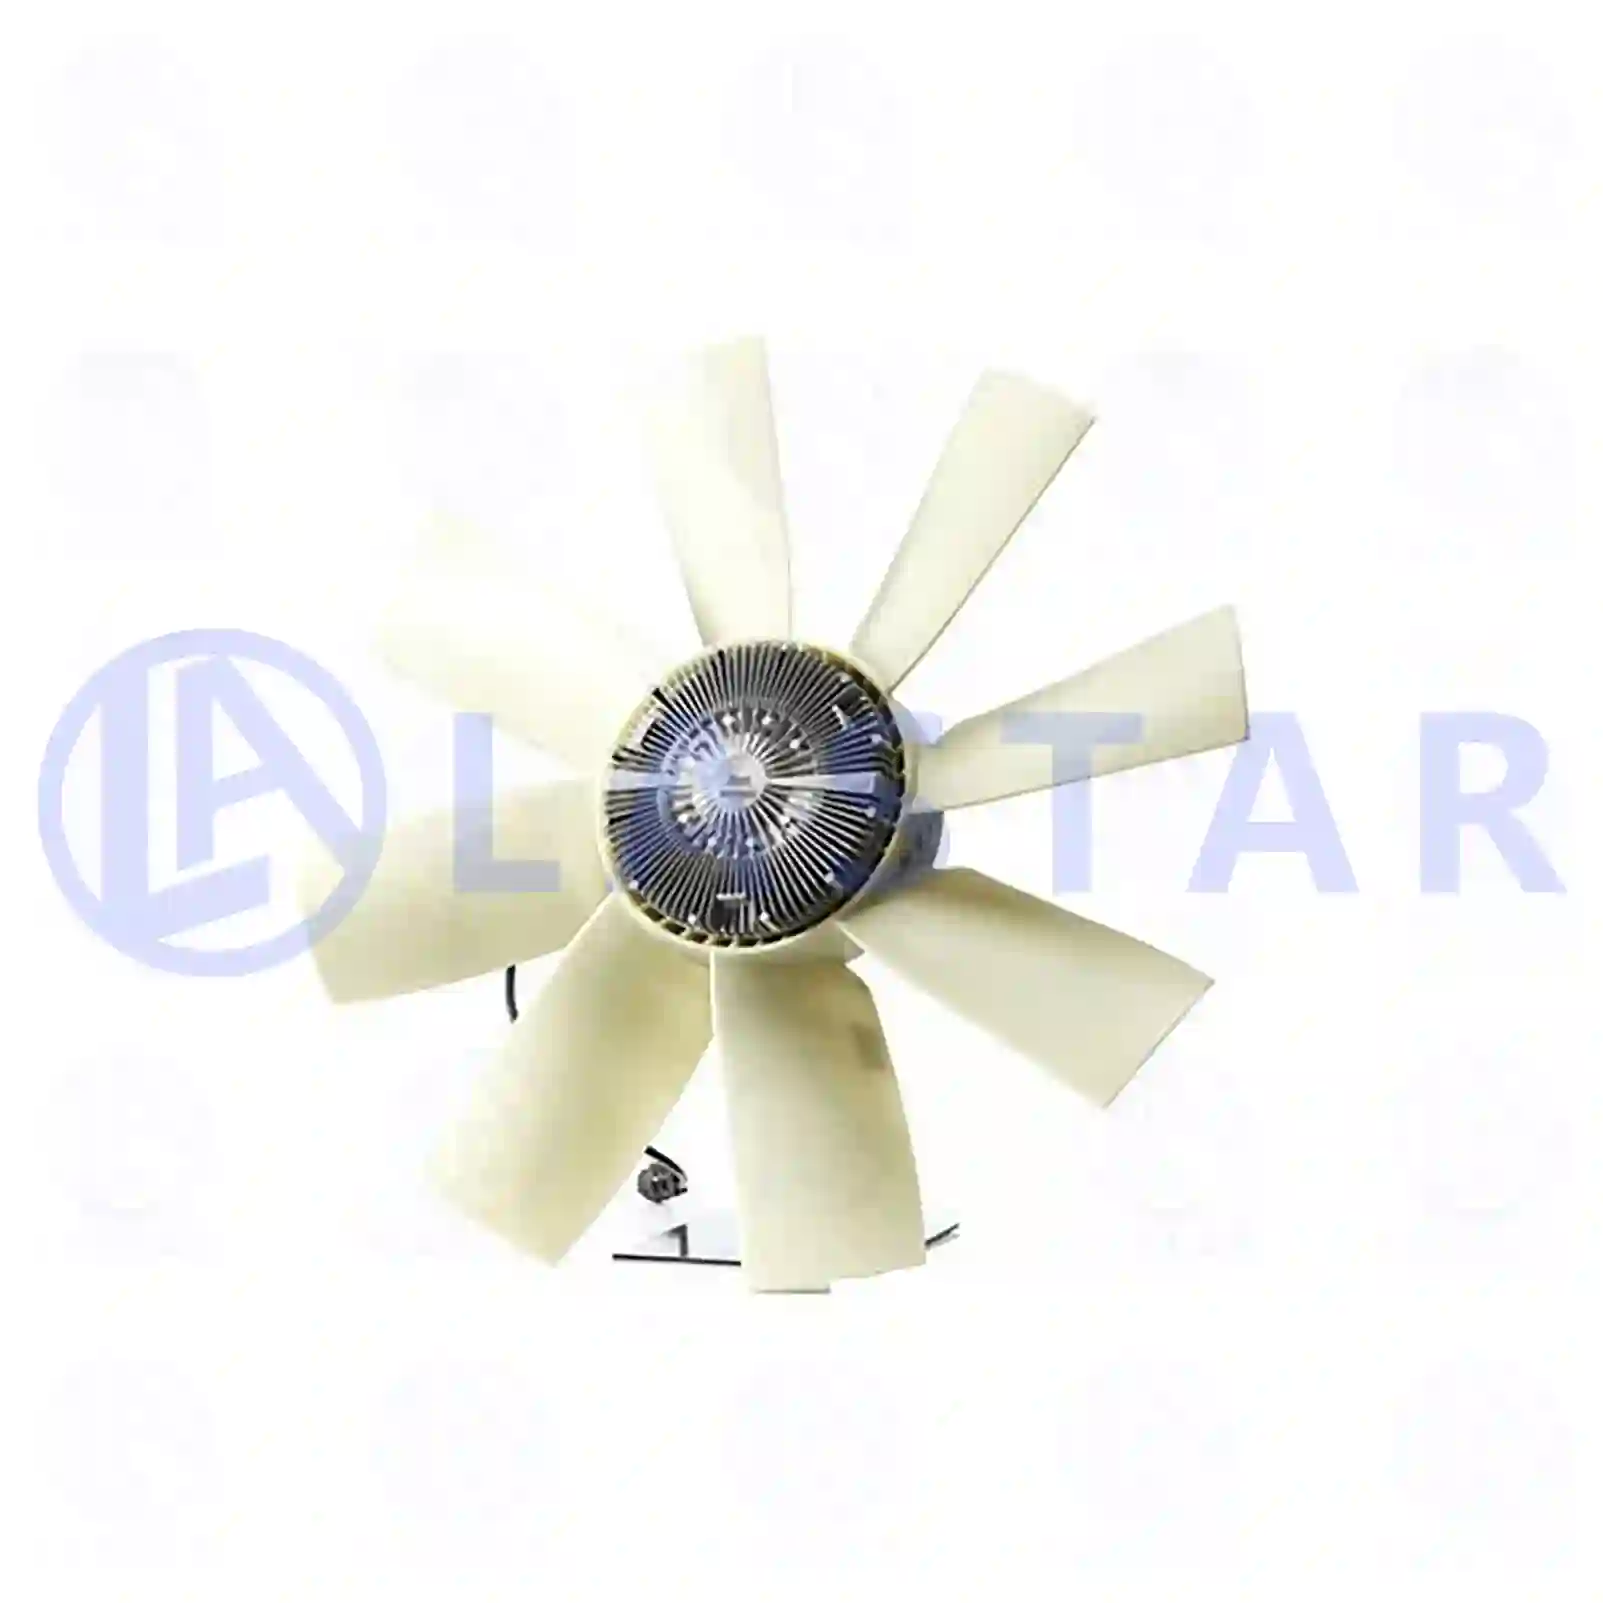 Fan with clutch, 77709417, 20450210, 20450240, 85000178, ZG00399-0008 ||  77709417 Lastar Spare Part | Truck Spare Parts, Auotomotive Spare Parts Fan with clutch, 77709417, 20450210, 20450240, 85000178, ZG00399-0008 ||  77709417 Lastar Spare Part | Truck Spare Parts, Auotomotive Spare Parts